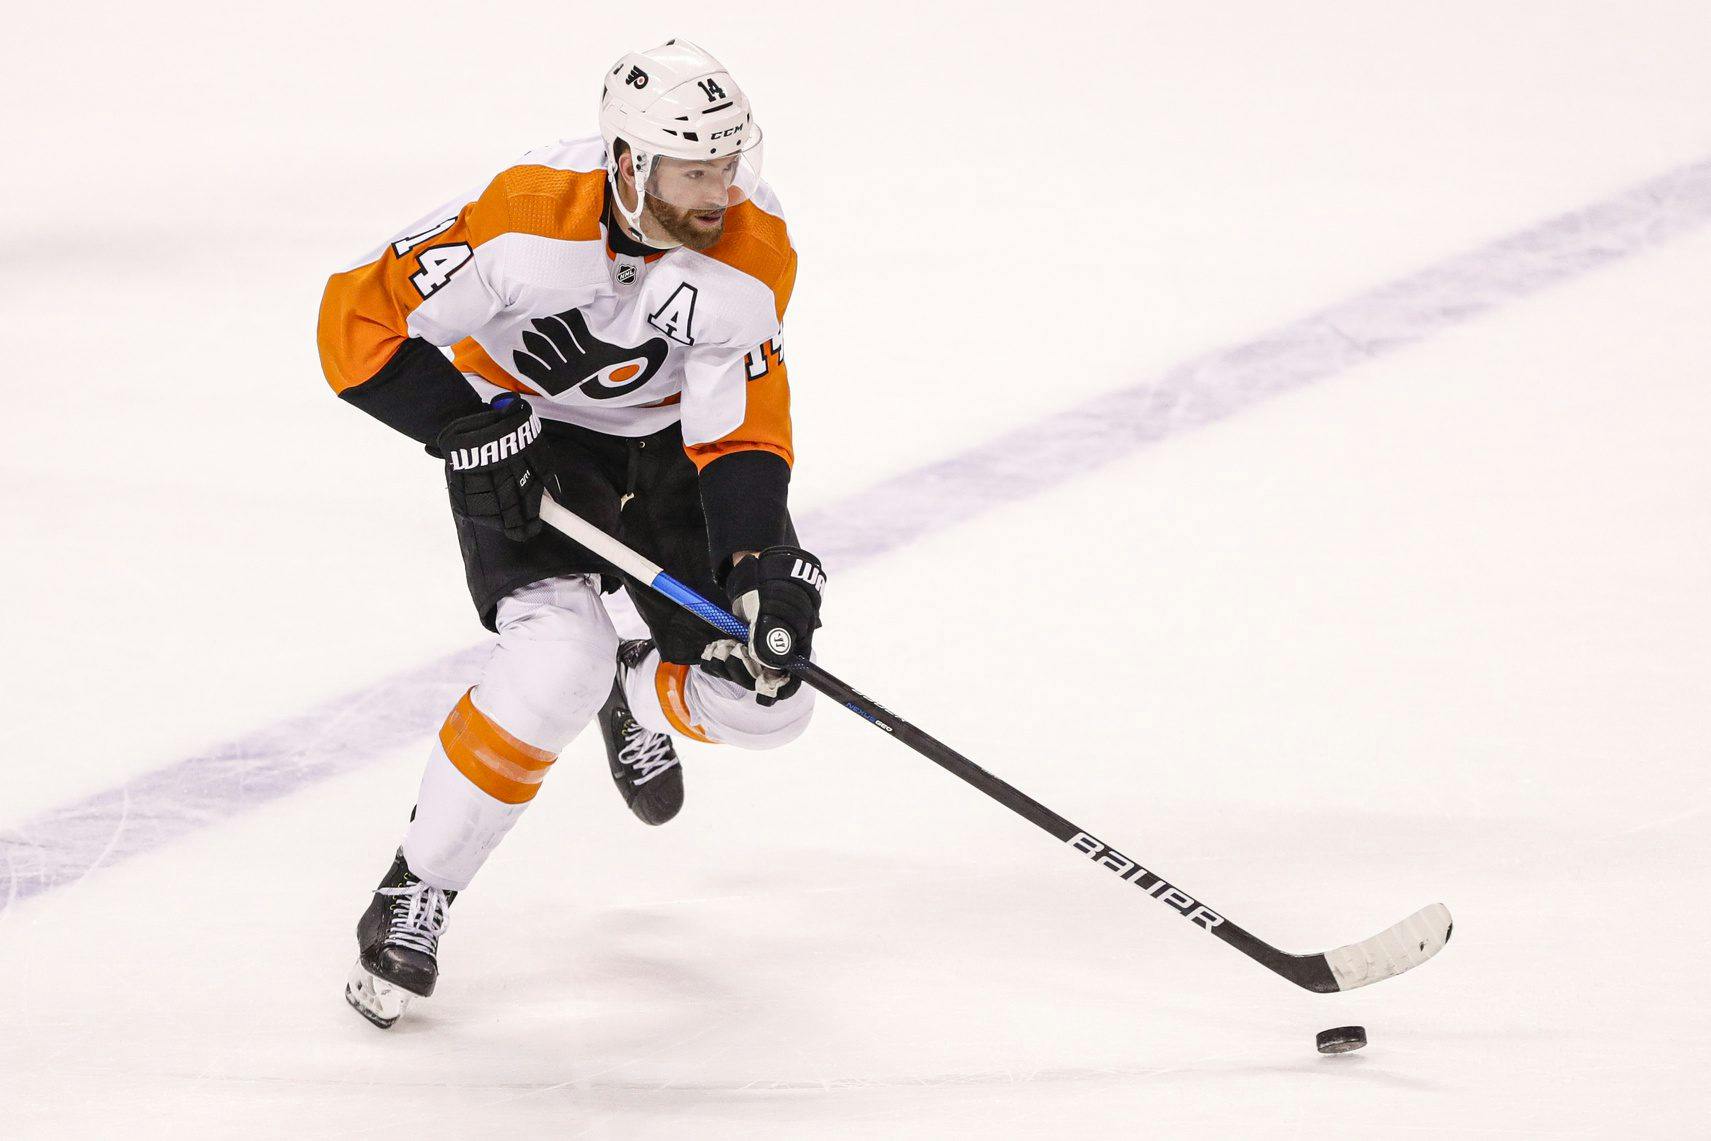 Sean Couturier could wind up being the best addition for the Flyers